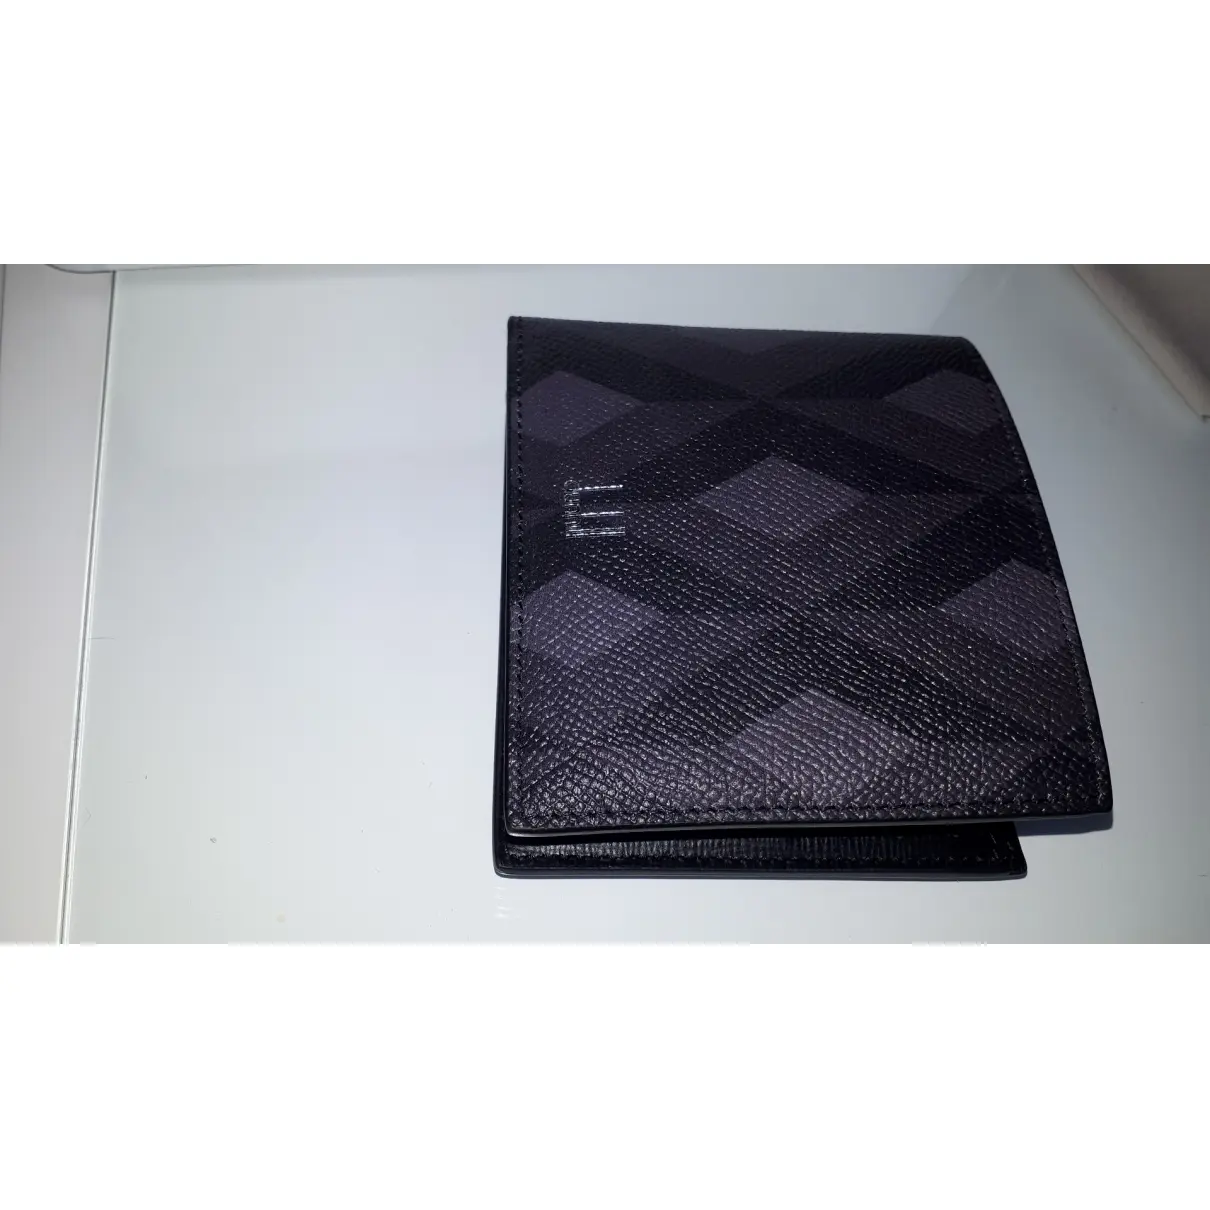 Alfred Dunhill Cloth small bag for sale